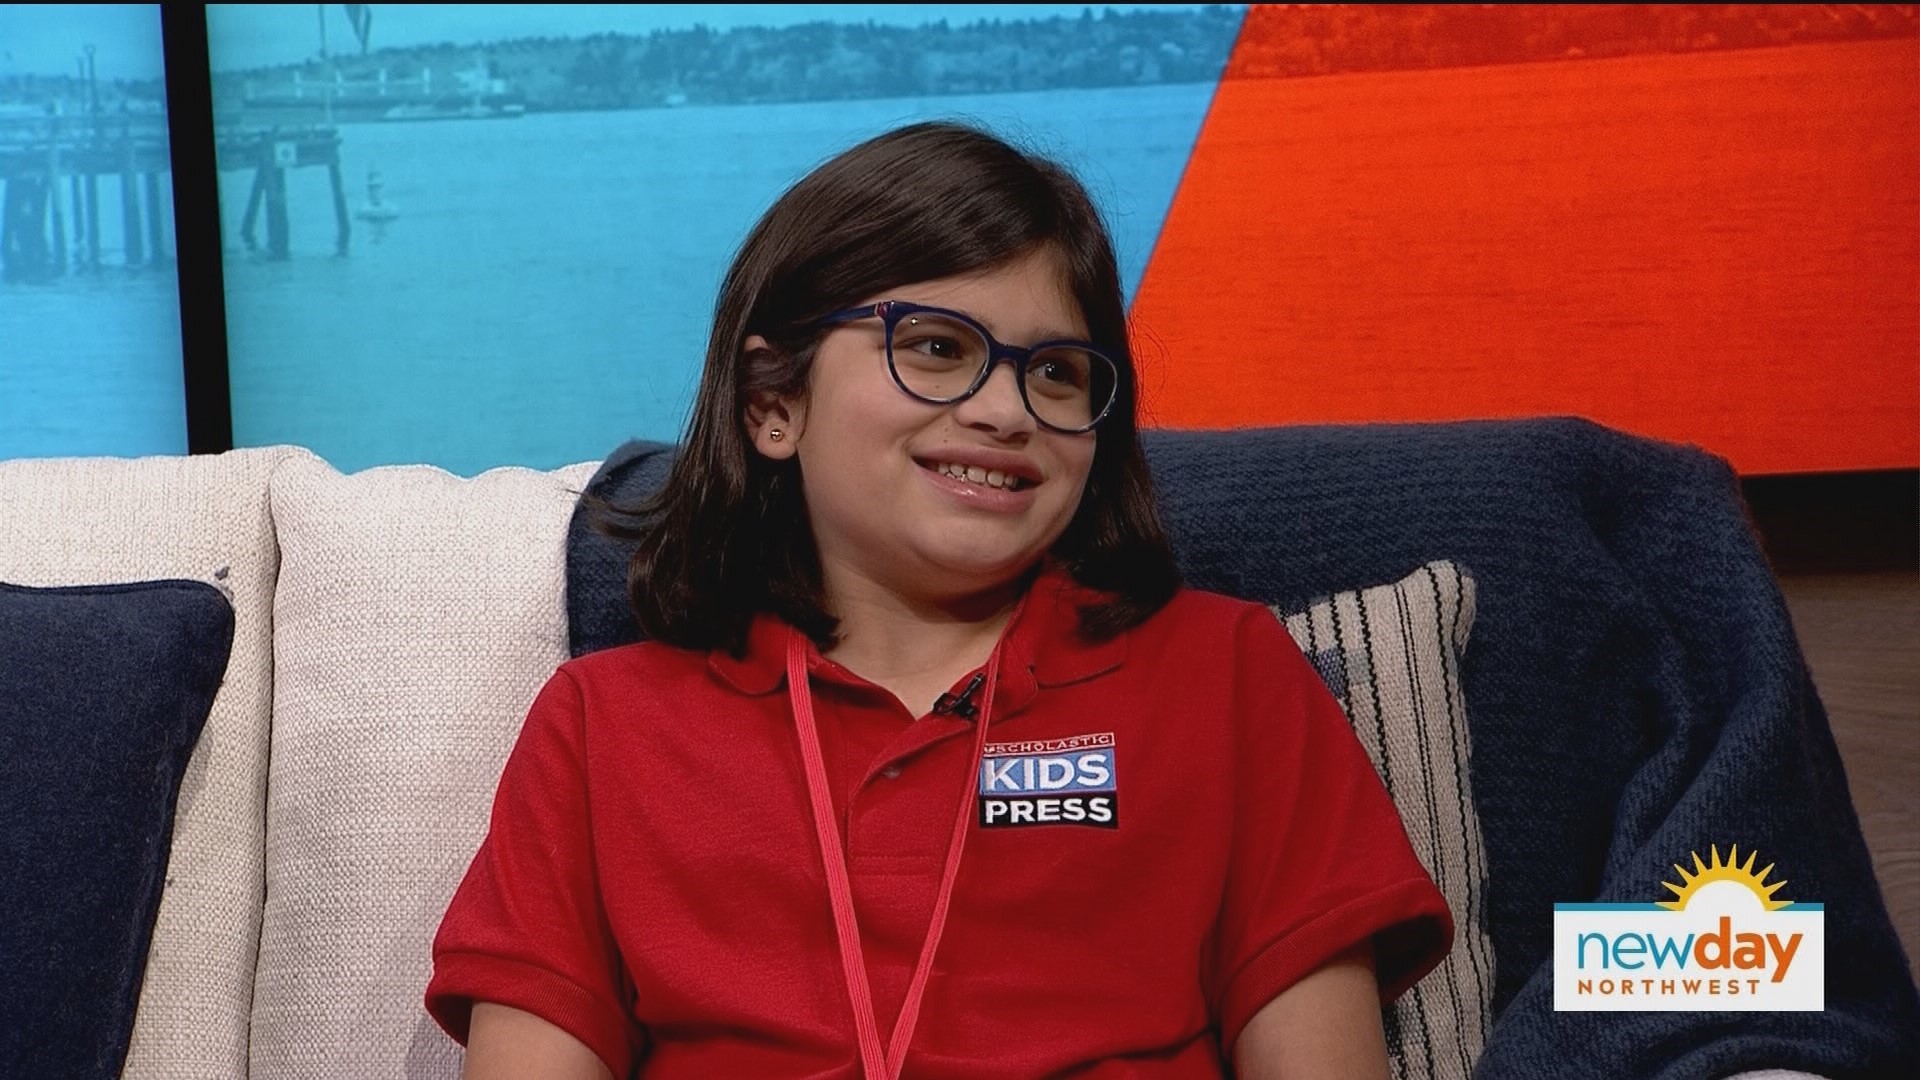 Cascadia Elementary's Zoe Adele Mirchandani will join the award-winning team of international young journalists to report "news for kids, by kids."